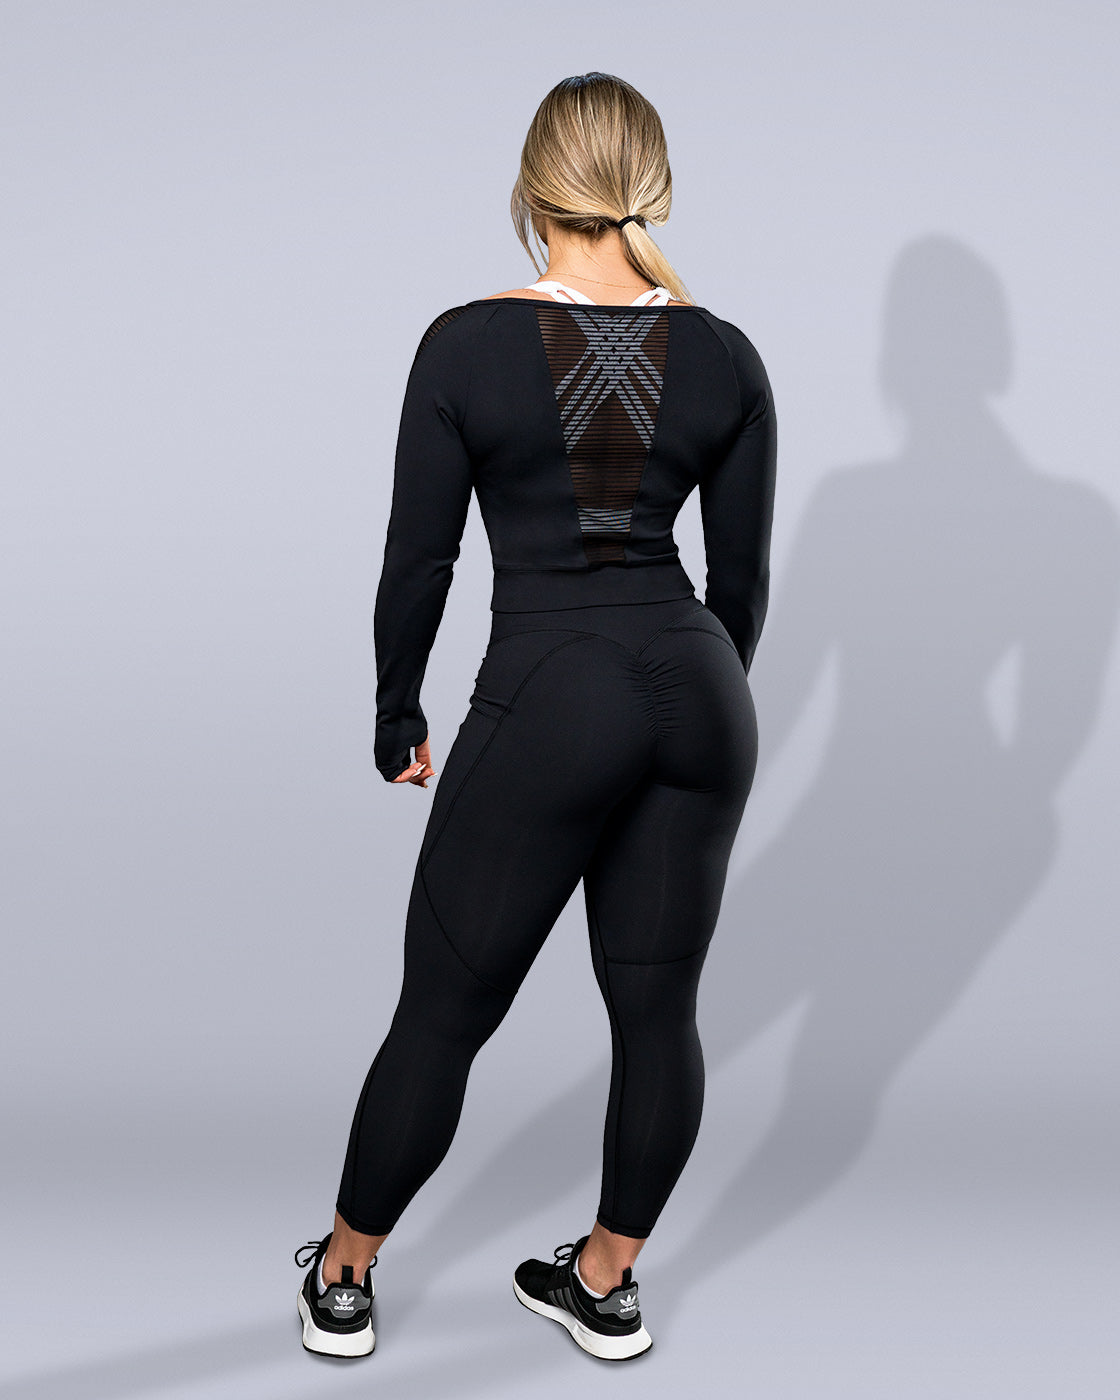 Booty Lifting Anti Cellulite Scrunch Leggings – The Old Captain Co.